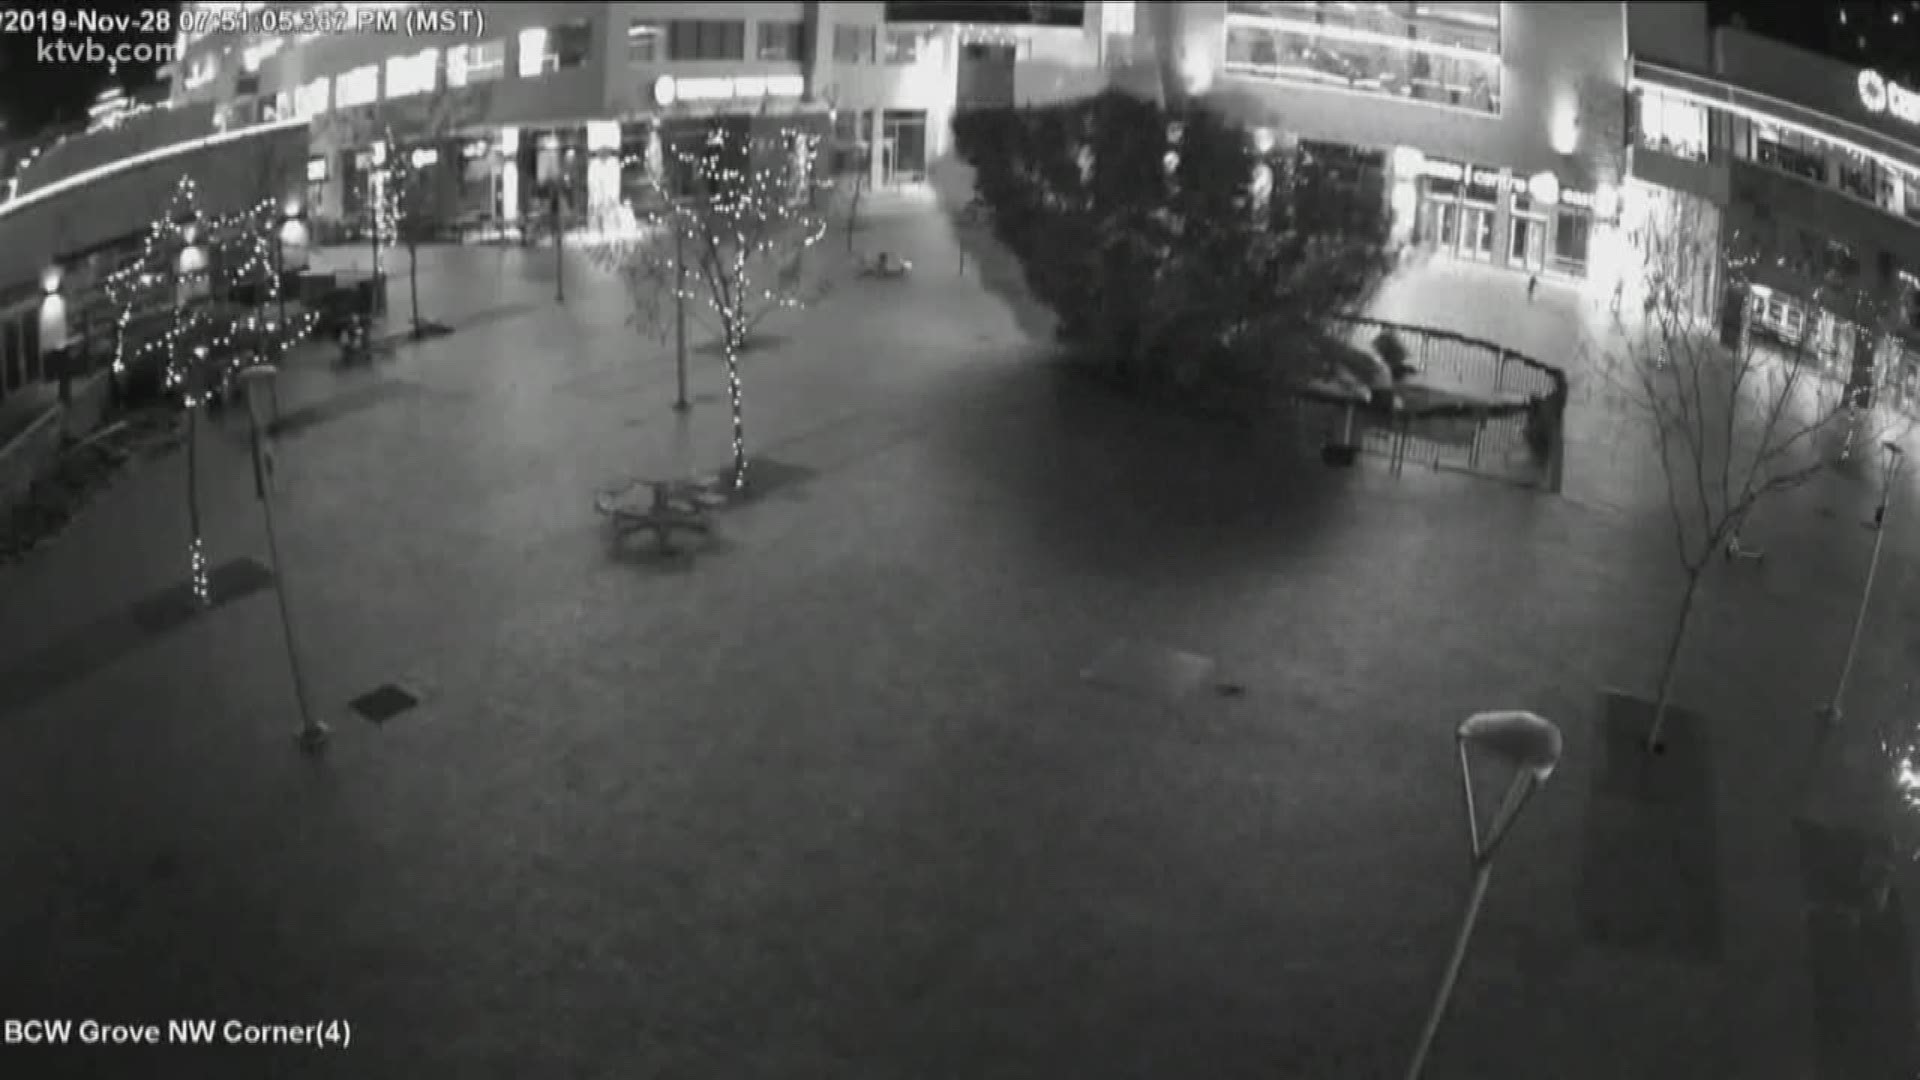 New security video shows the tree toppling. But does it answer the question about why the tree fell to the ground?